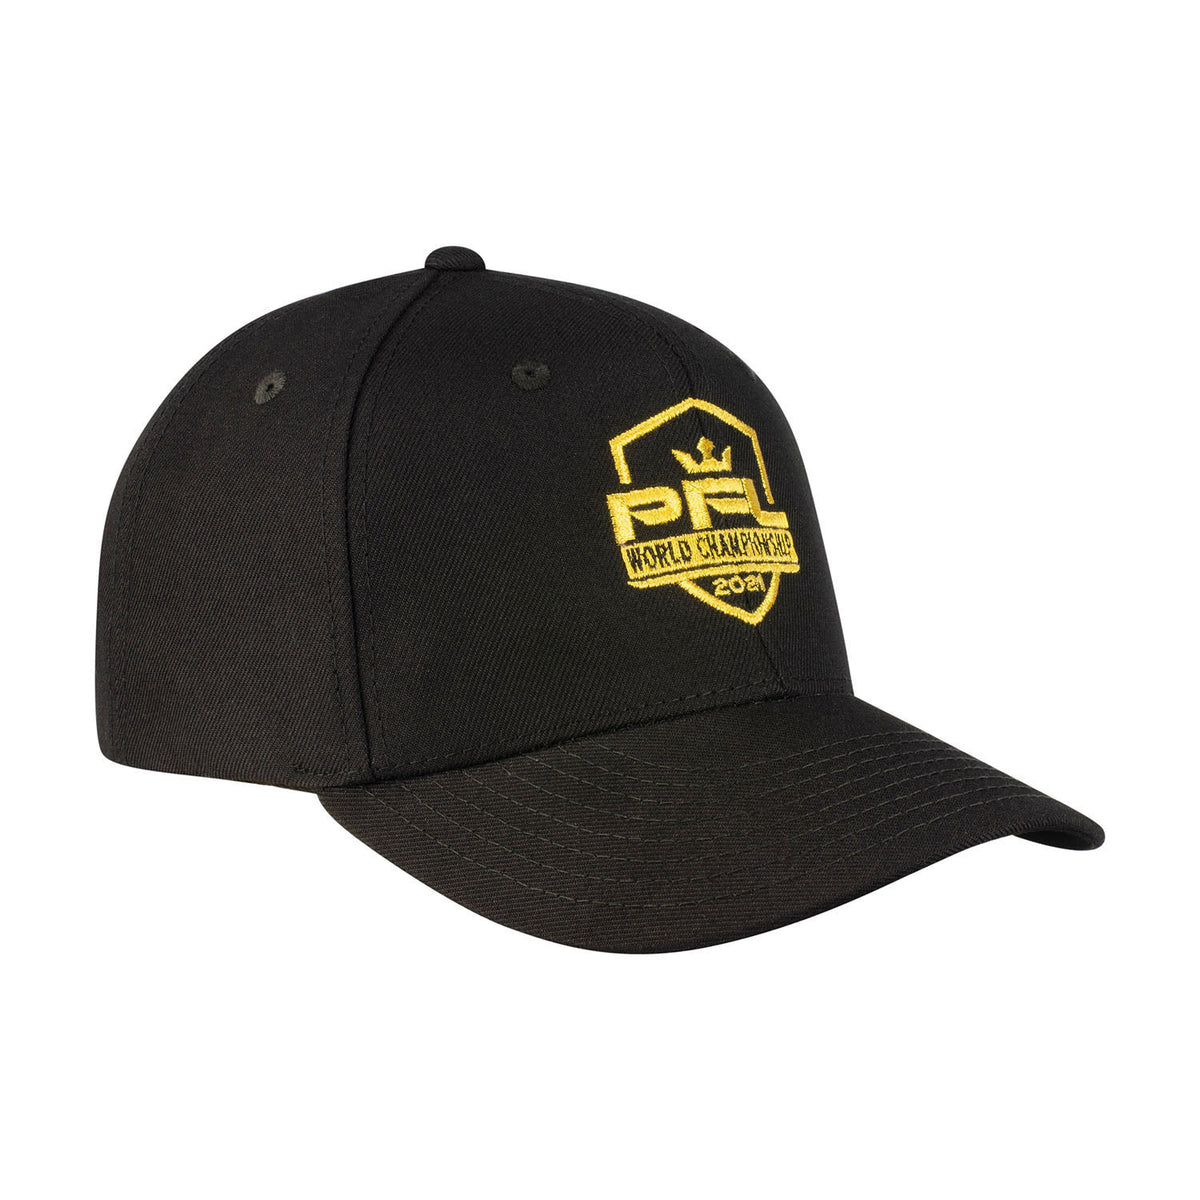 2021 PFL Championship Shield Hat in Black - Right Side View